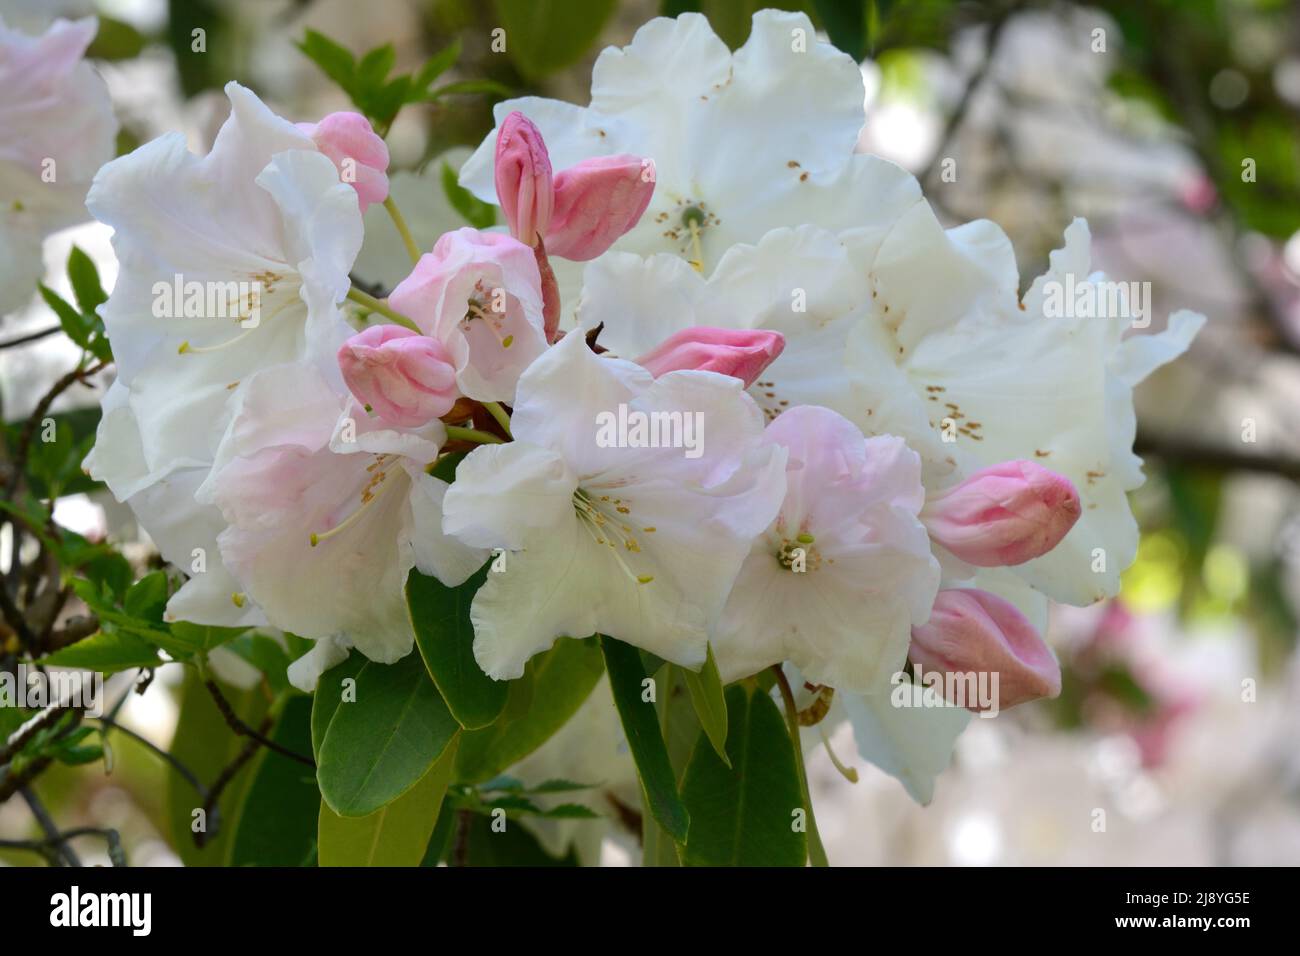 Rhododendron Loden King George grands bourgeons roses parfumés s'ouvrant aux fleurs blanches Banque D'Images